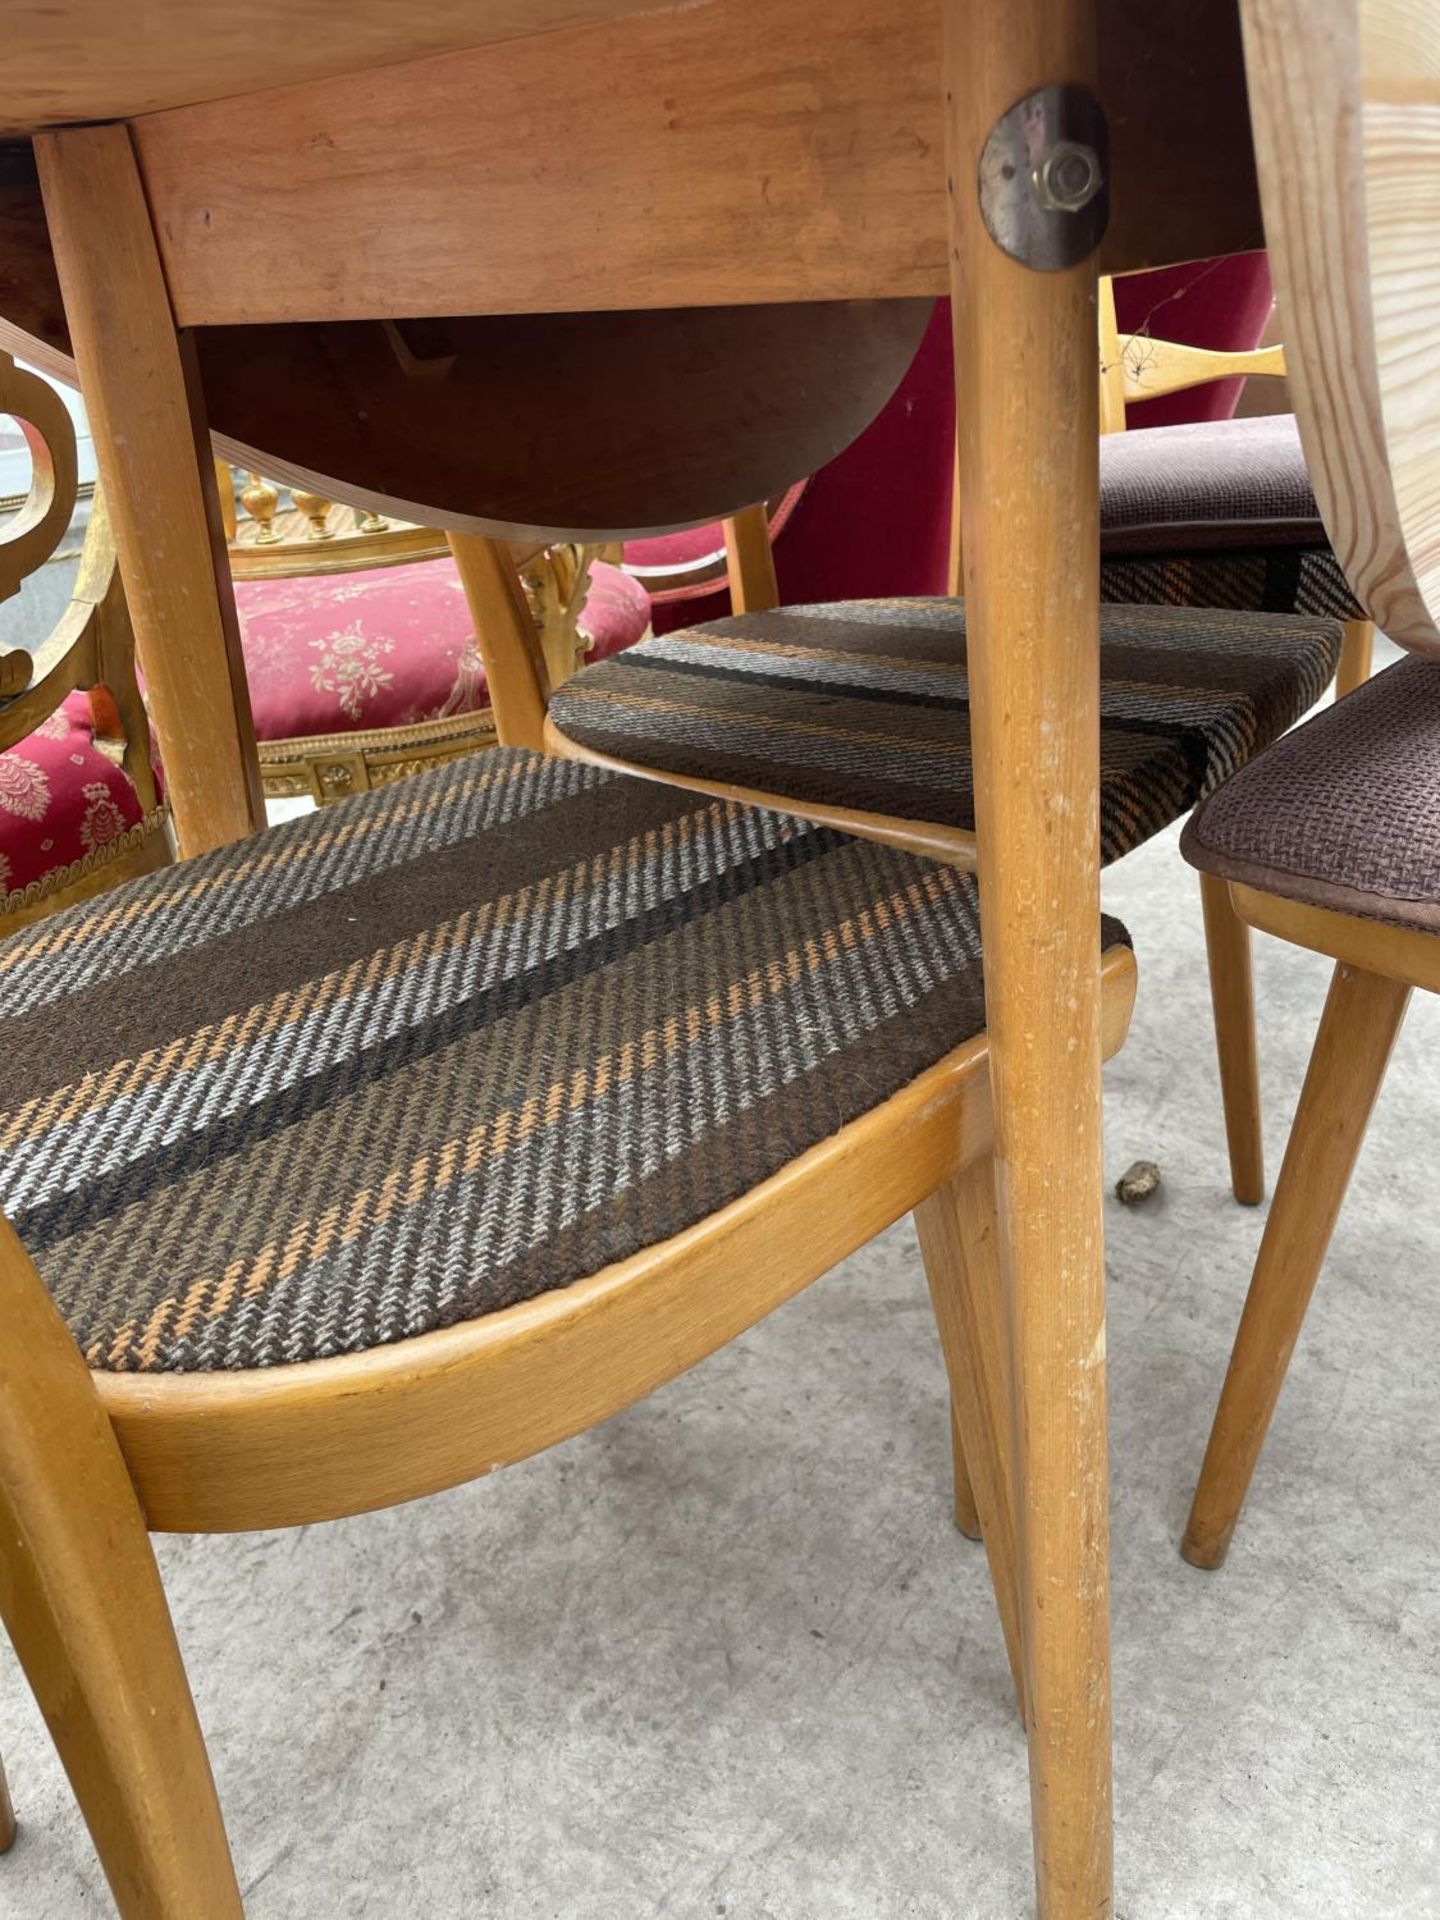 FOUR SARDAN LADDER BACK KITCHEN CHAIRS UPHOLSTERED IN MERKALON AND A DROP LEAF TABLE - Image 3 of 5